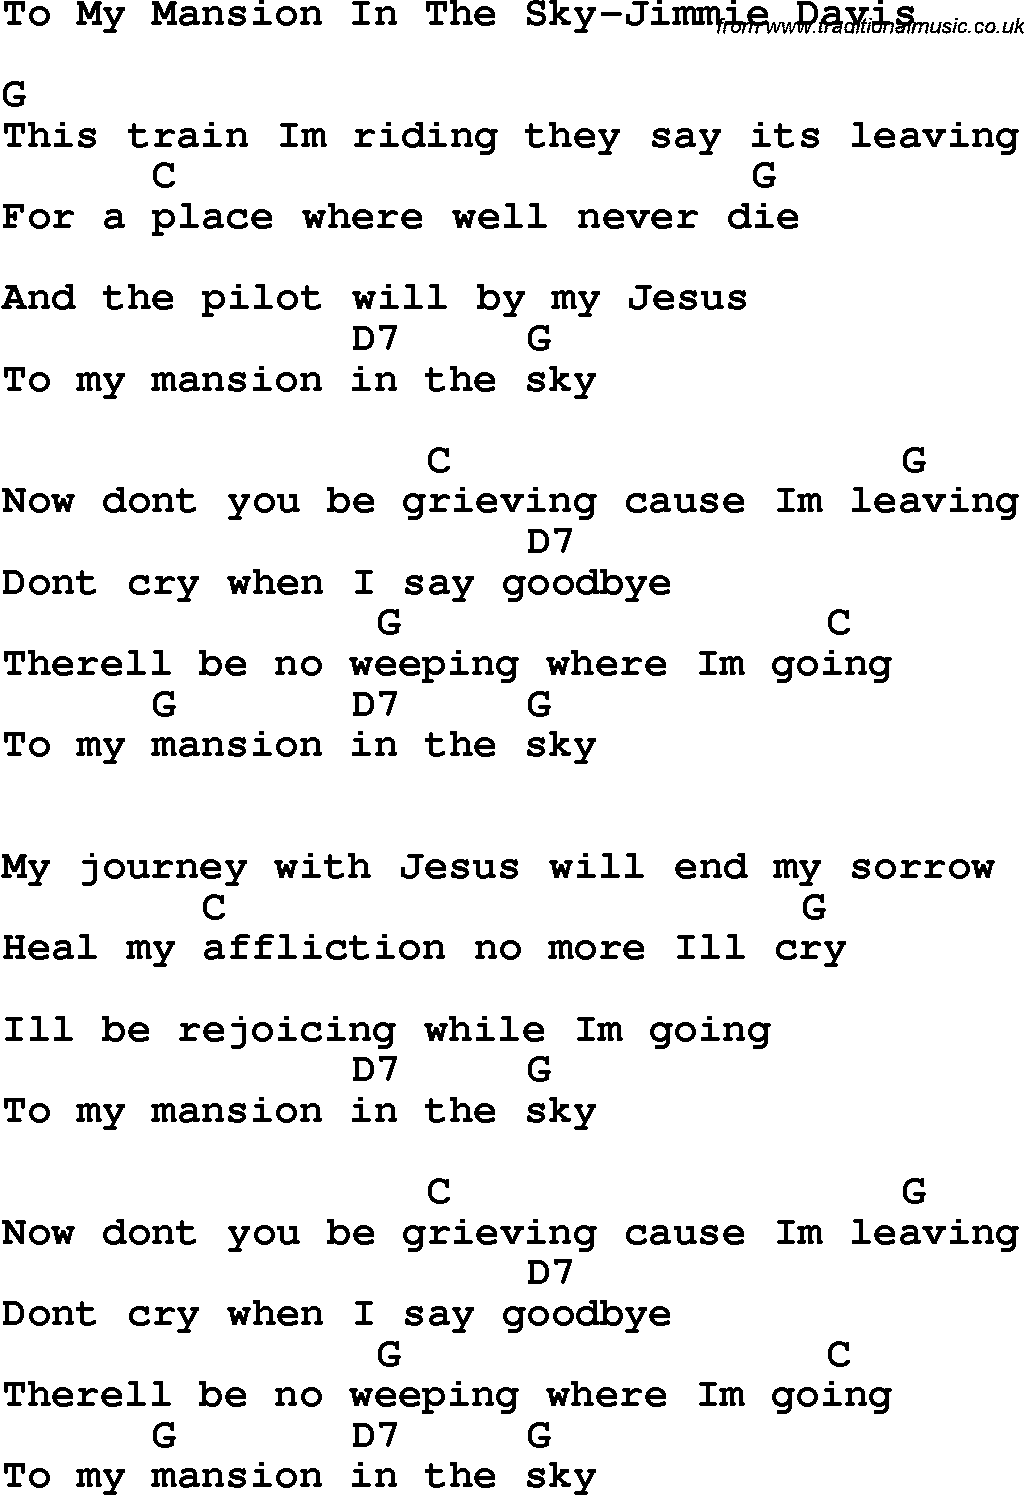 Country, Southern and Bluegrass Gospel Song To My Mansion In The Sky-Jimmie Davis lyrics and chords